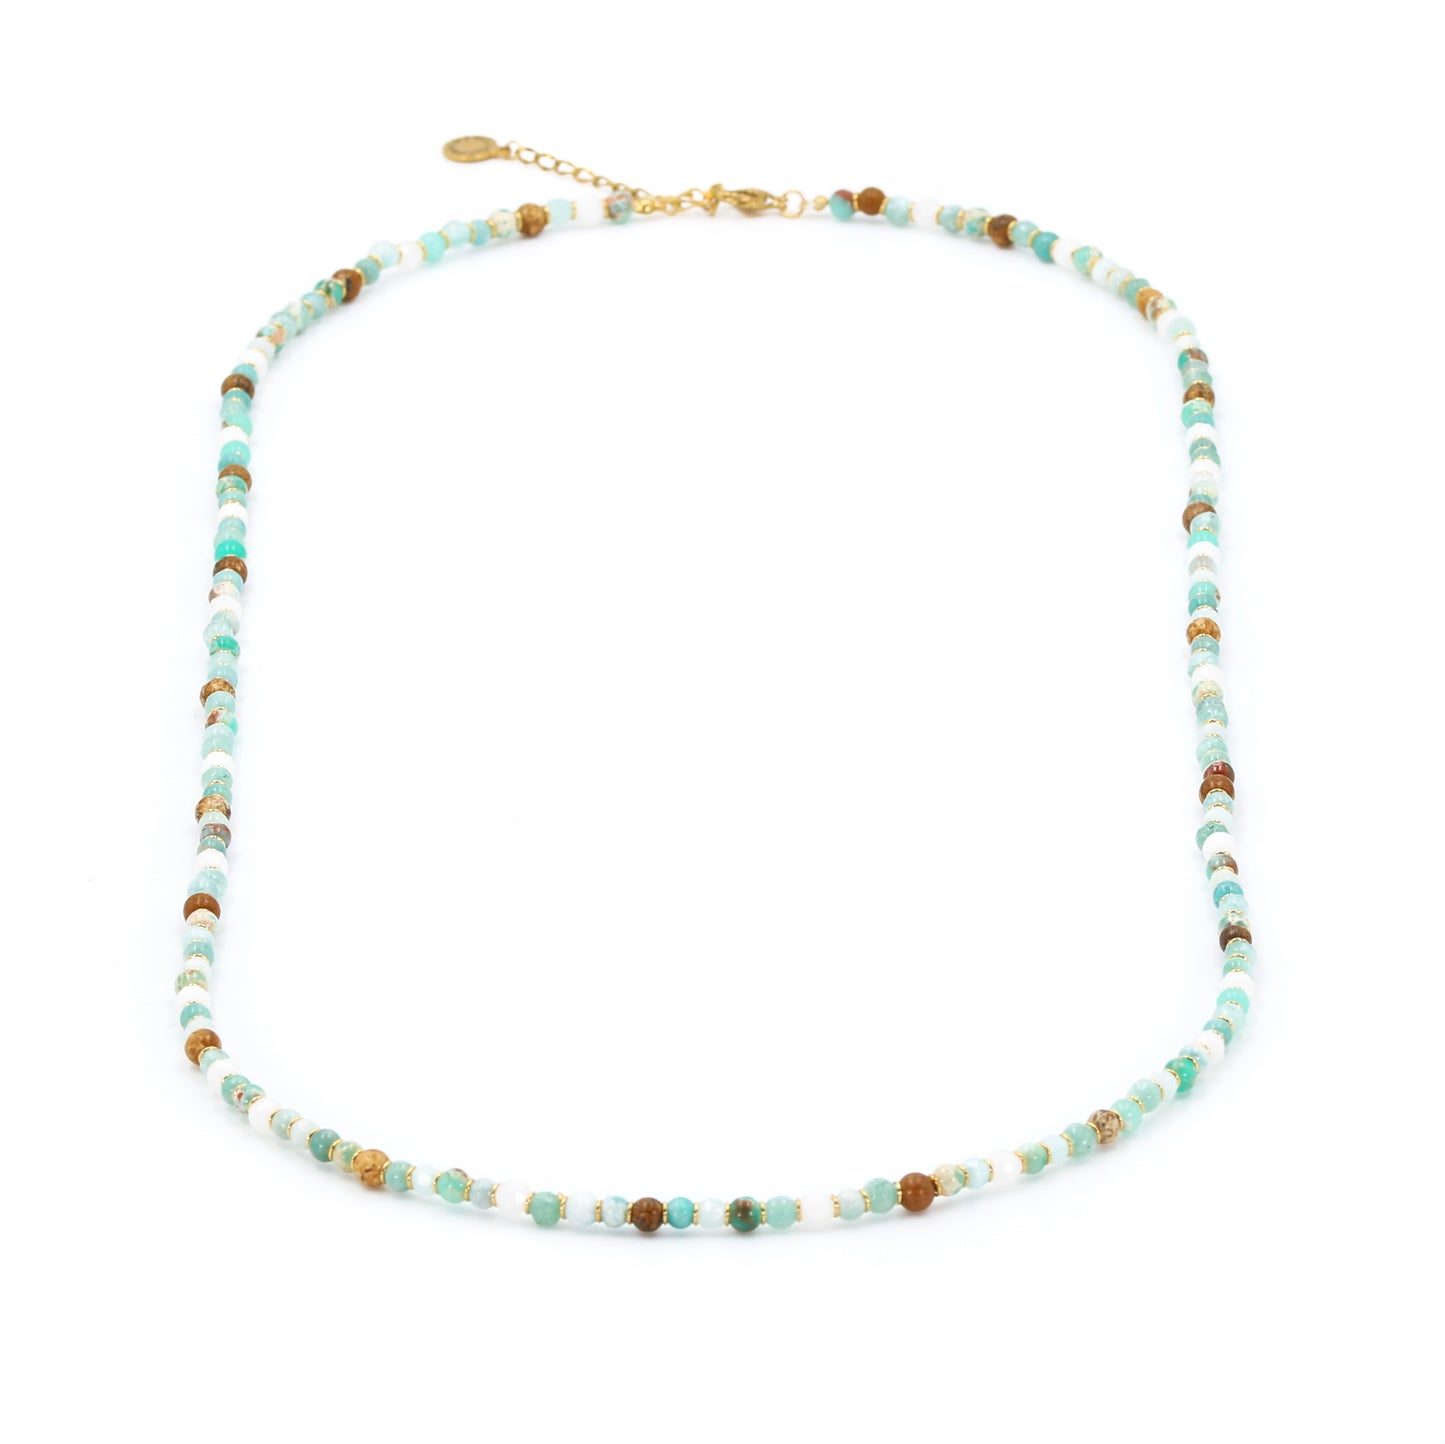 "Turcicus Medium 80" Necklace - CAORLE THE SMALL VENICE Collection